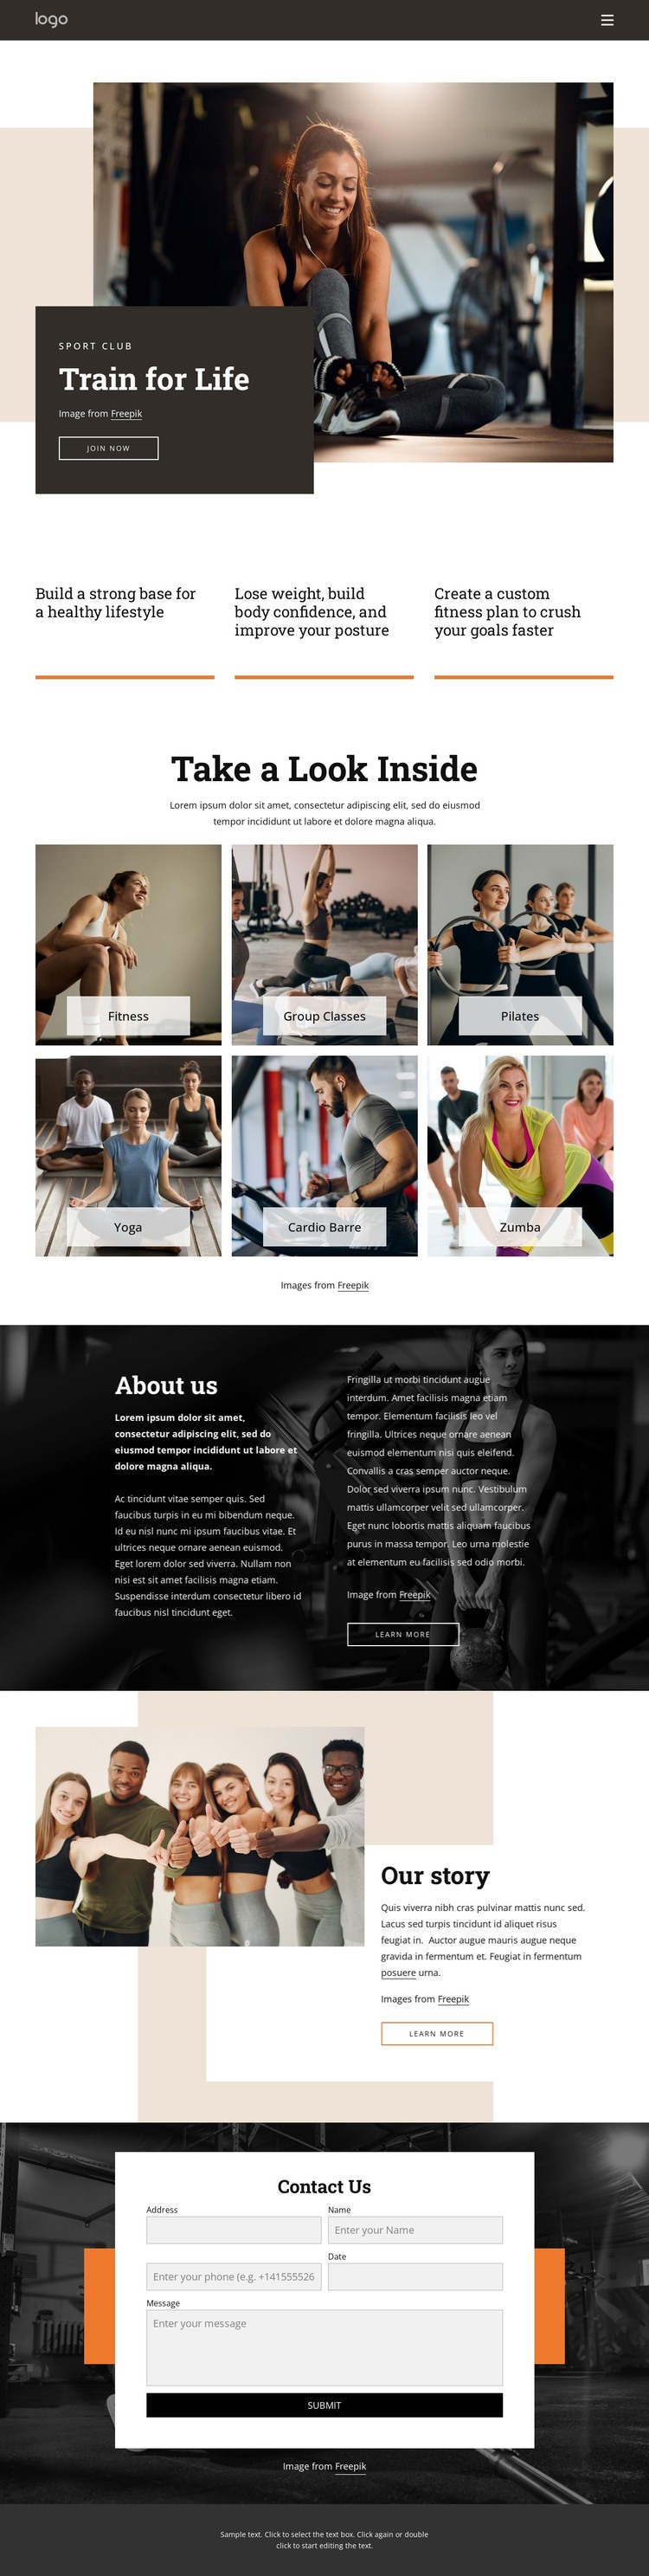 Get moving with our range of classes Web Design